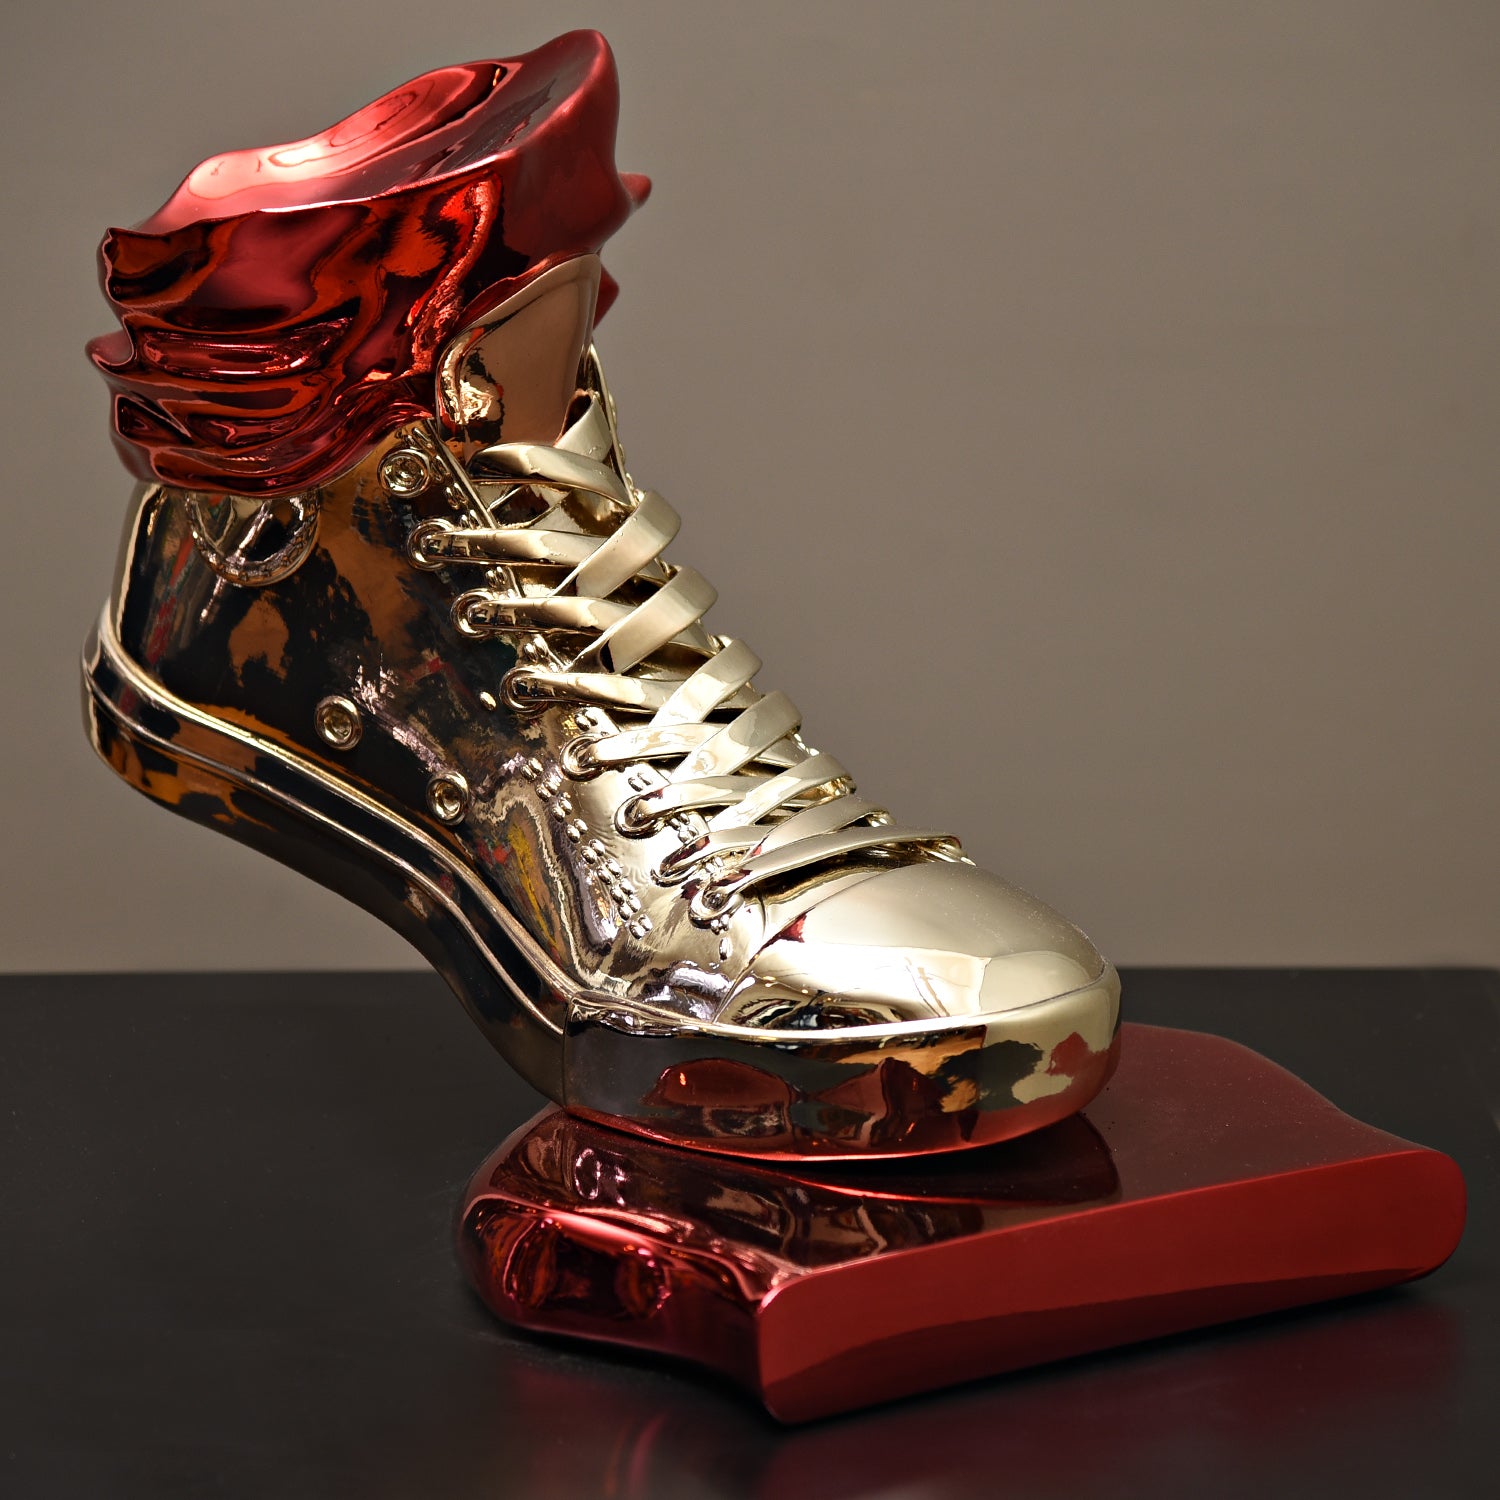 Shoe, 2018 Silver And Red Sculpture